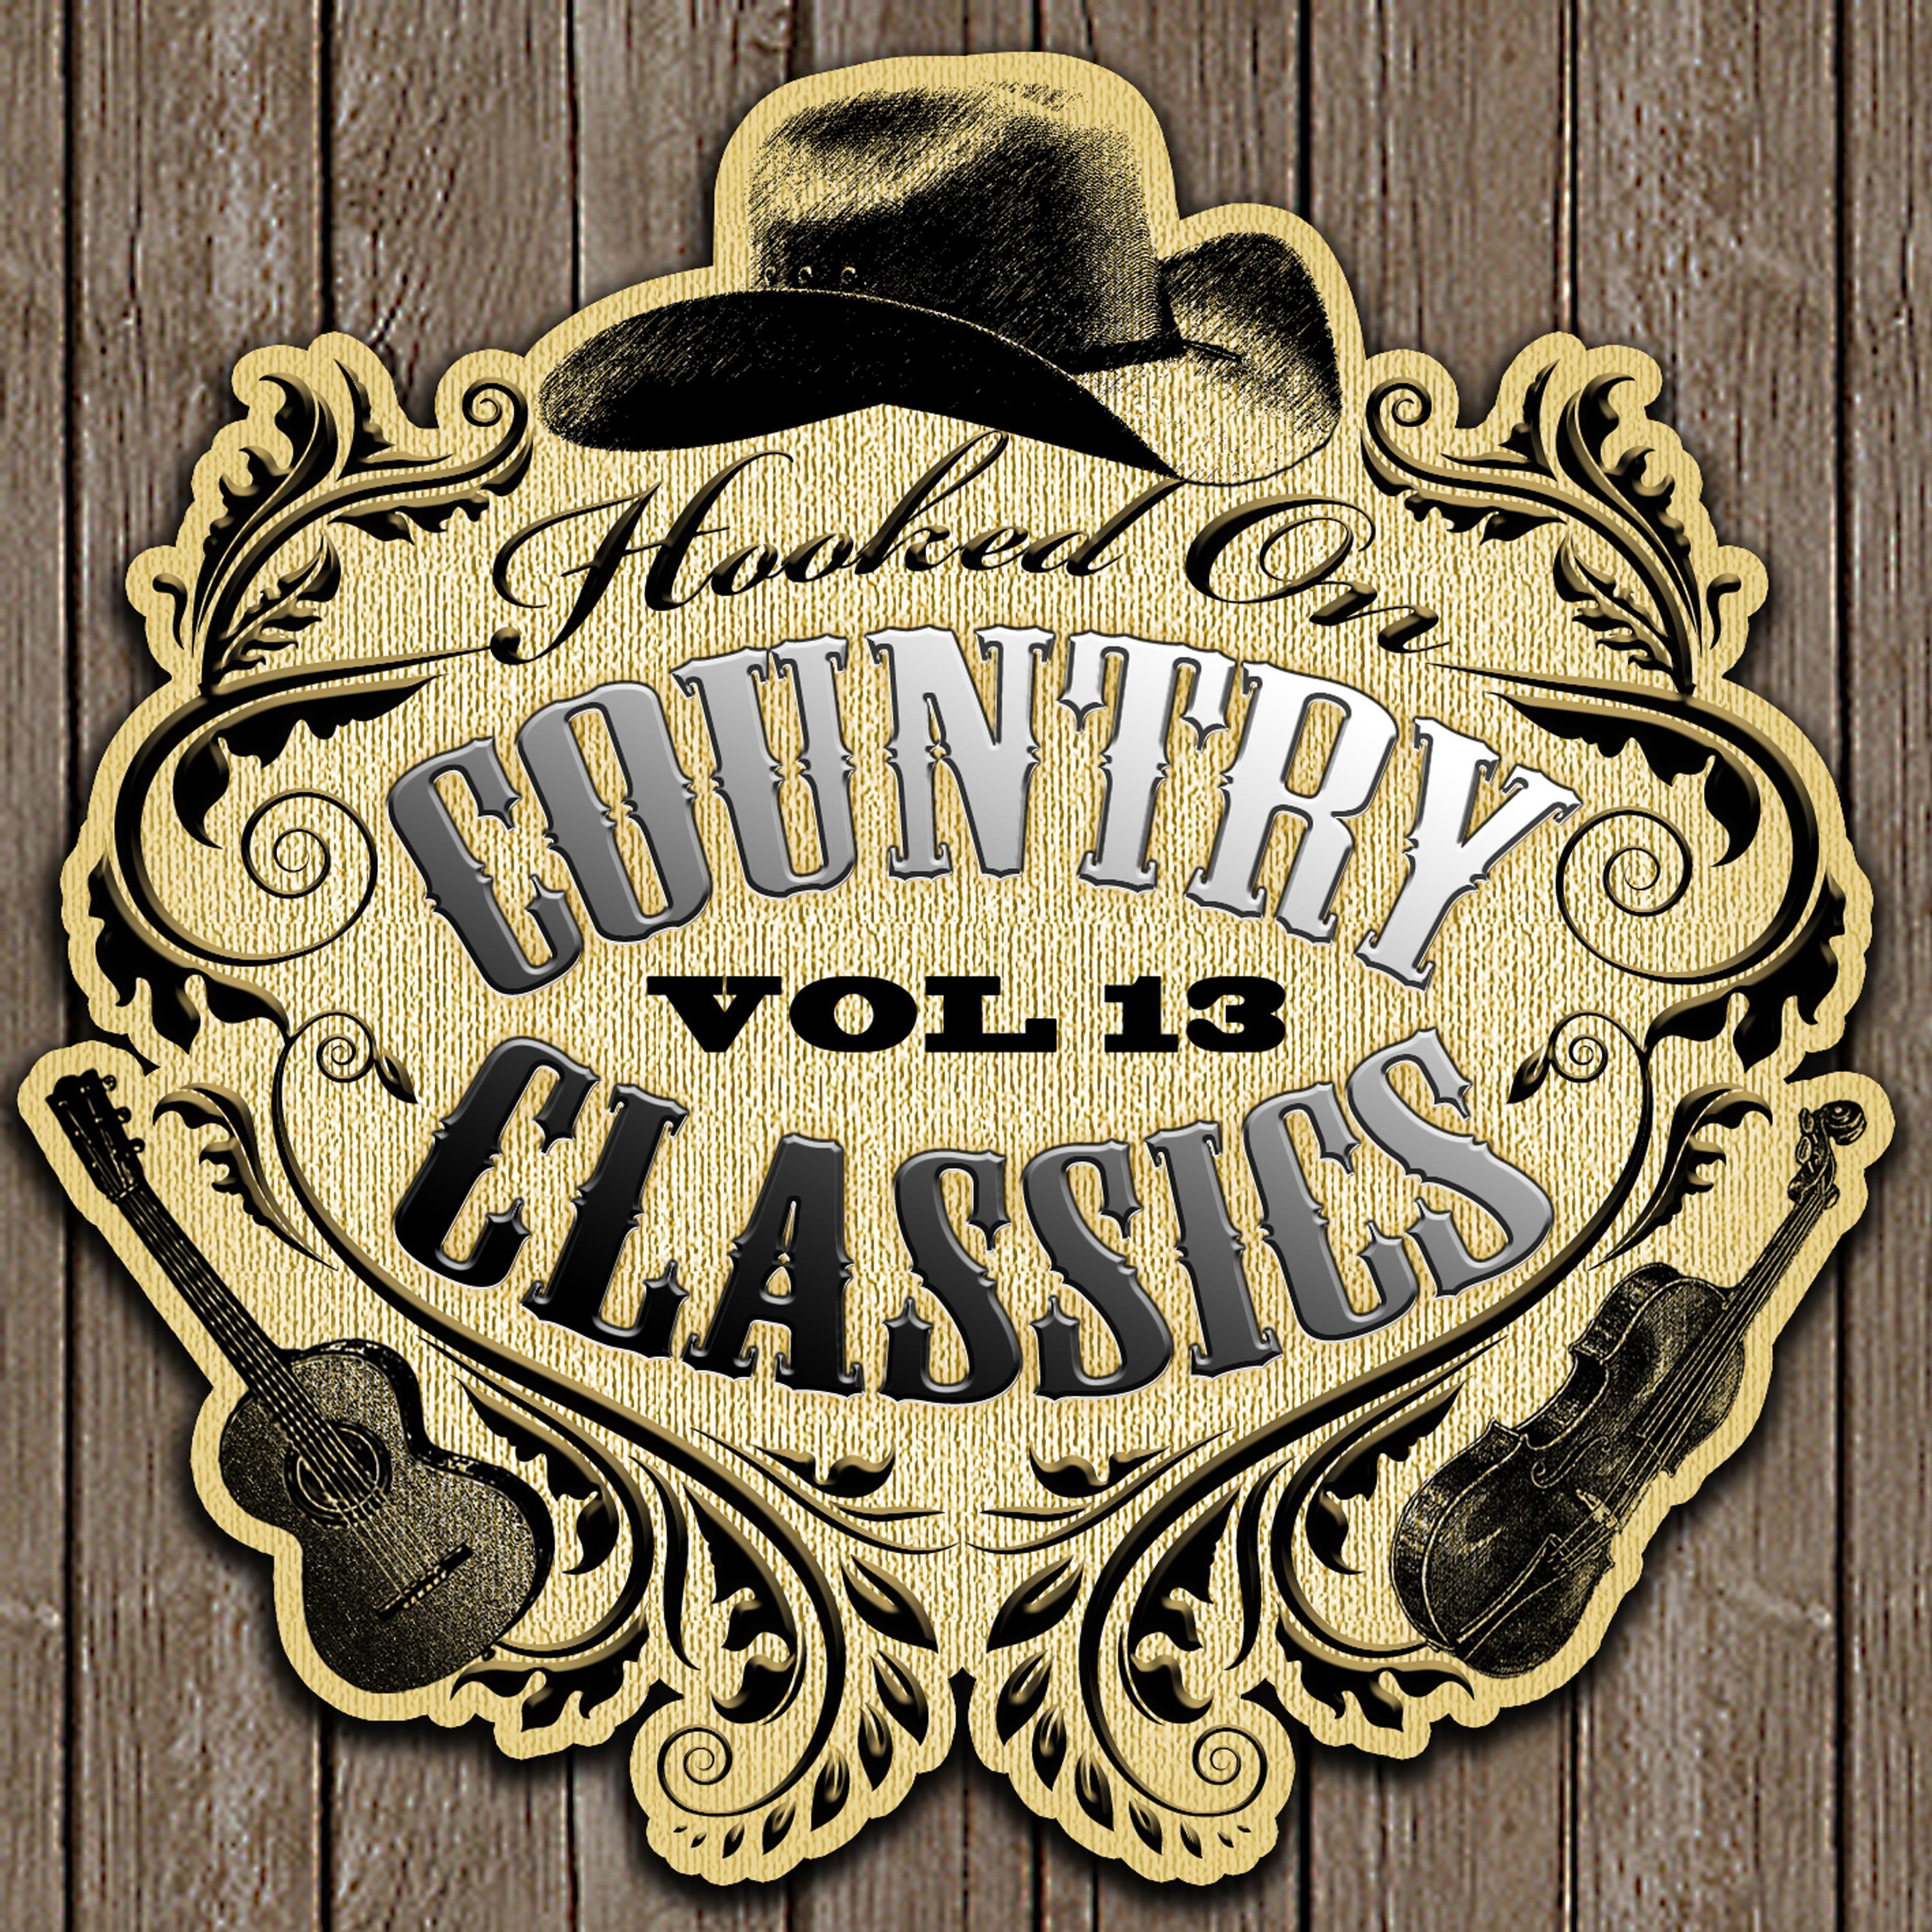 Hooked On Country Classics, Vol. 13